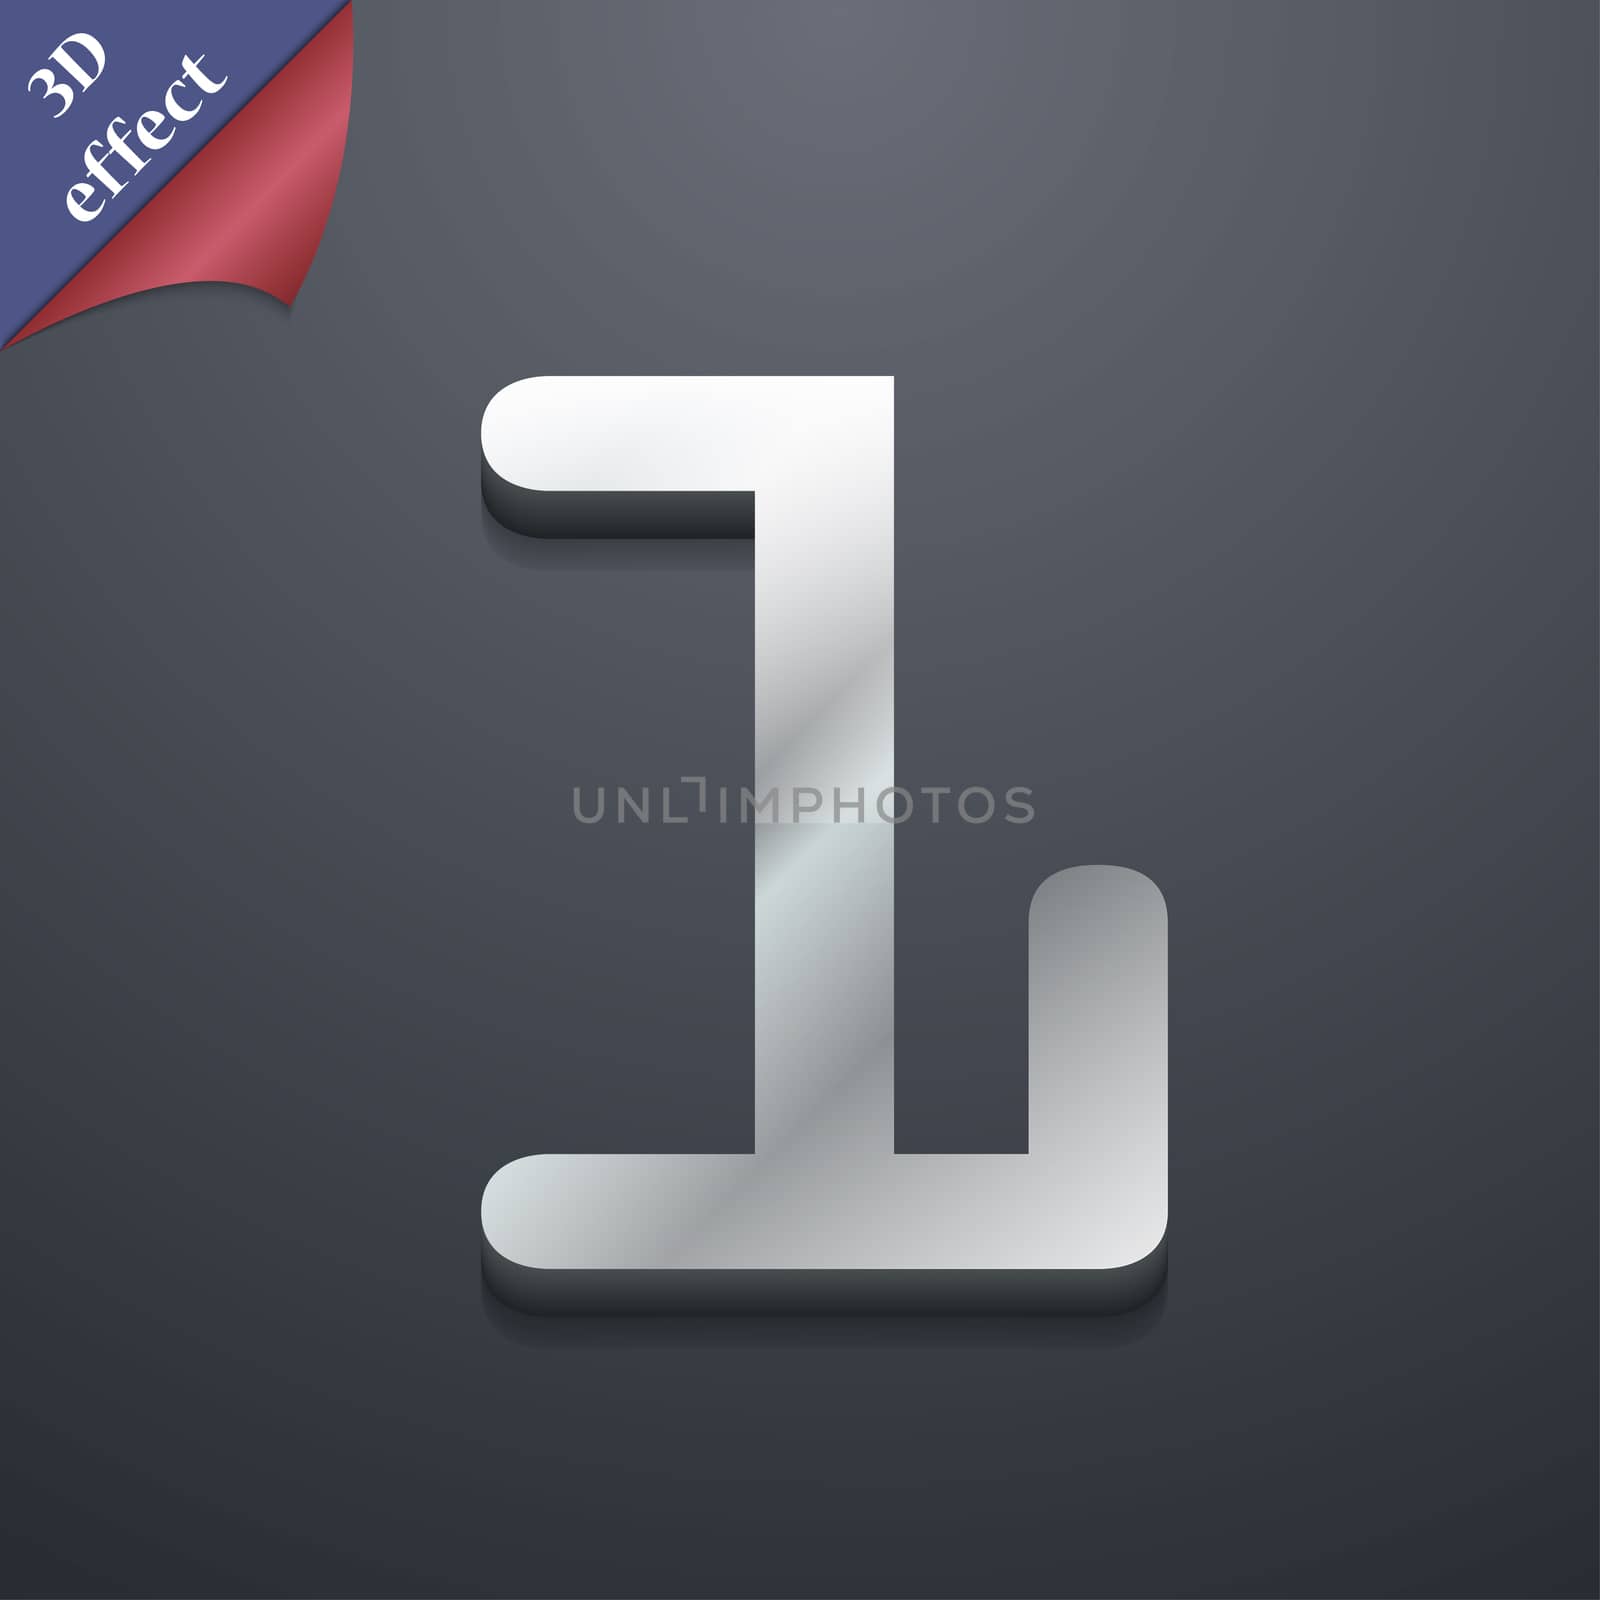 number one icon symbol. 3D style. Trendy, modern design with space for your text illustration. Rastrized copy